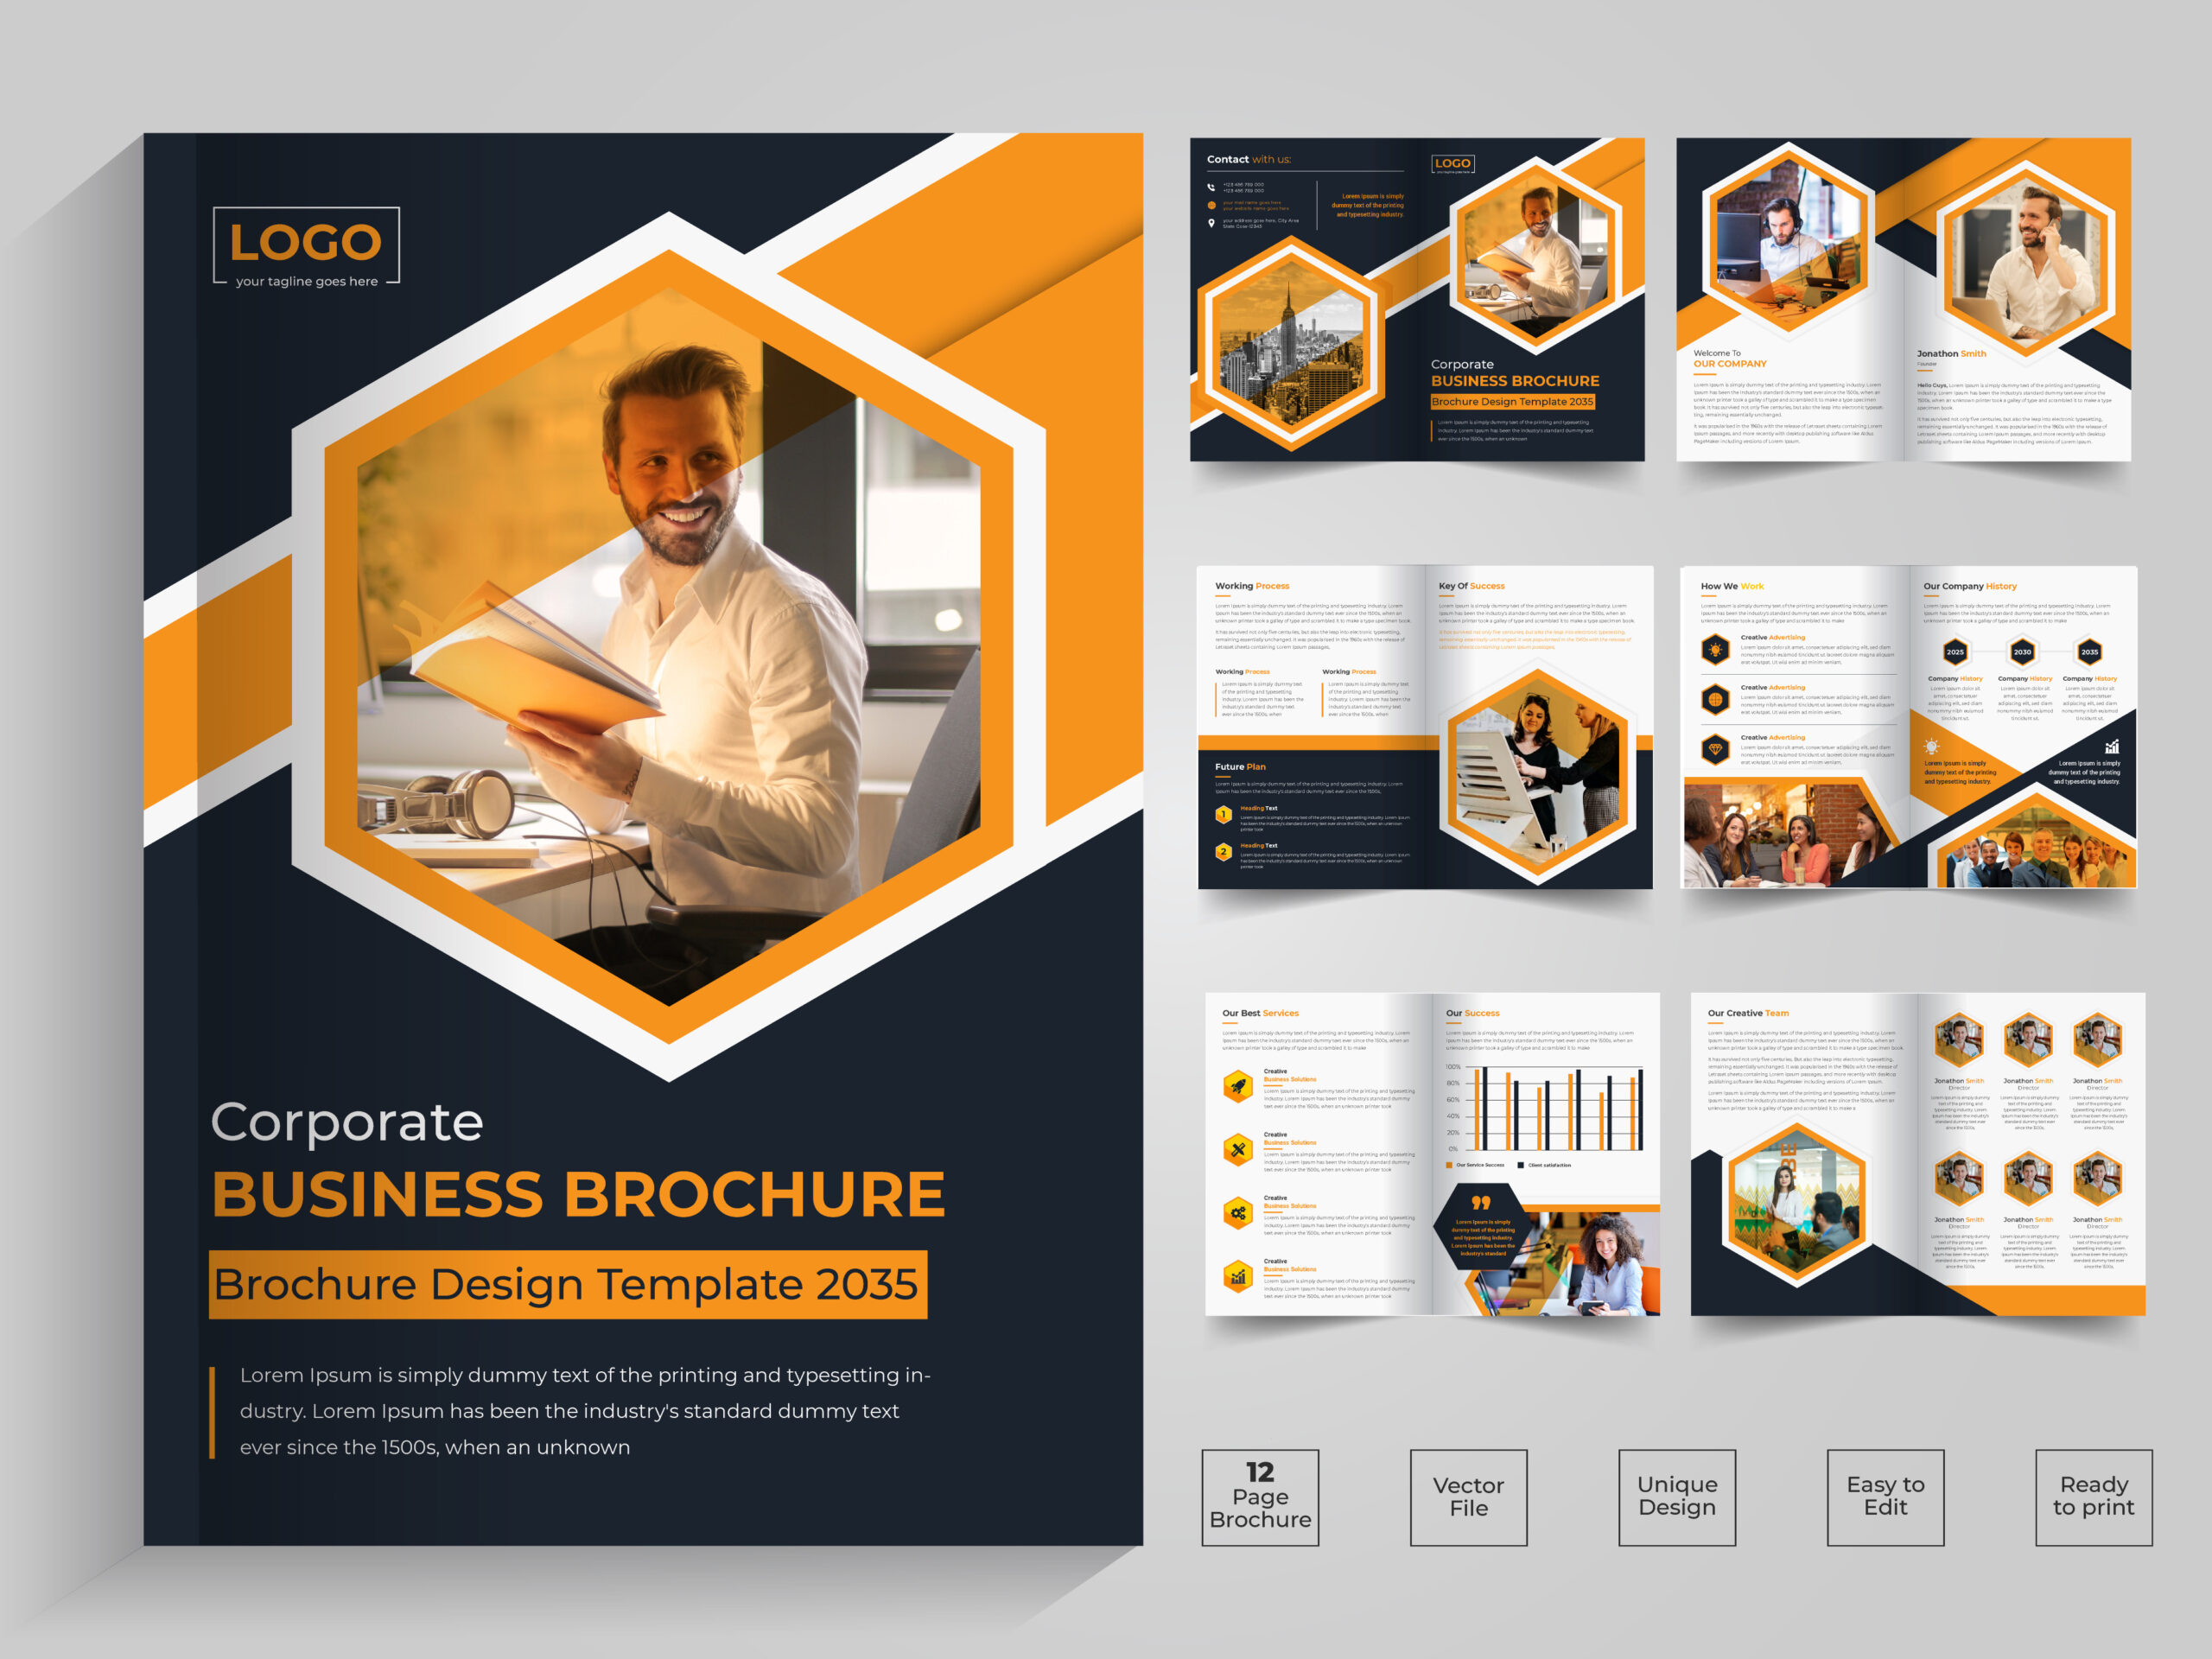 Minimal & Clean 10 Page Brochure Design Throughout 12 Page Brochure Template